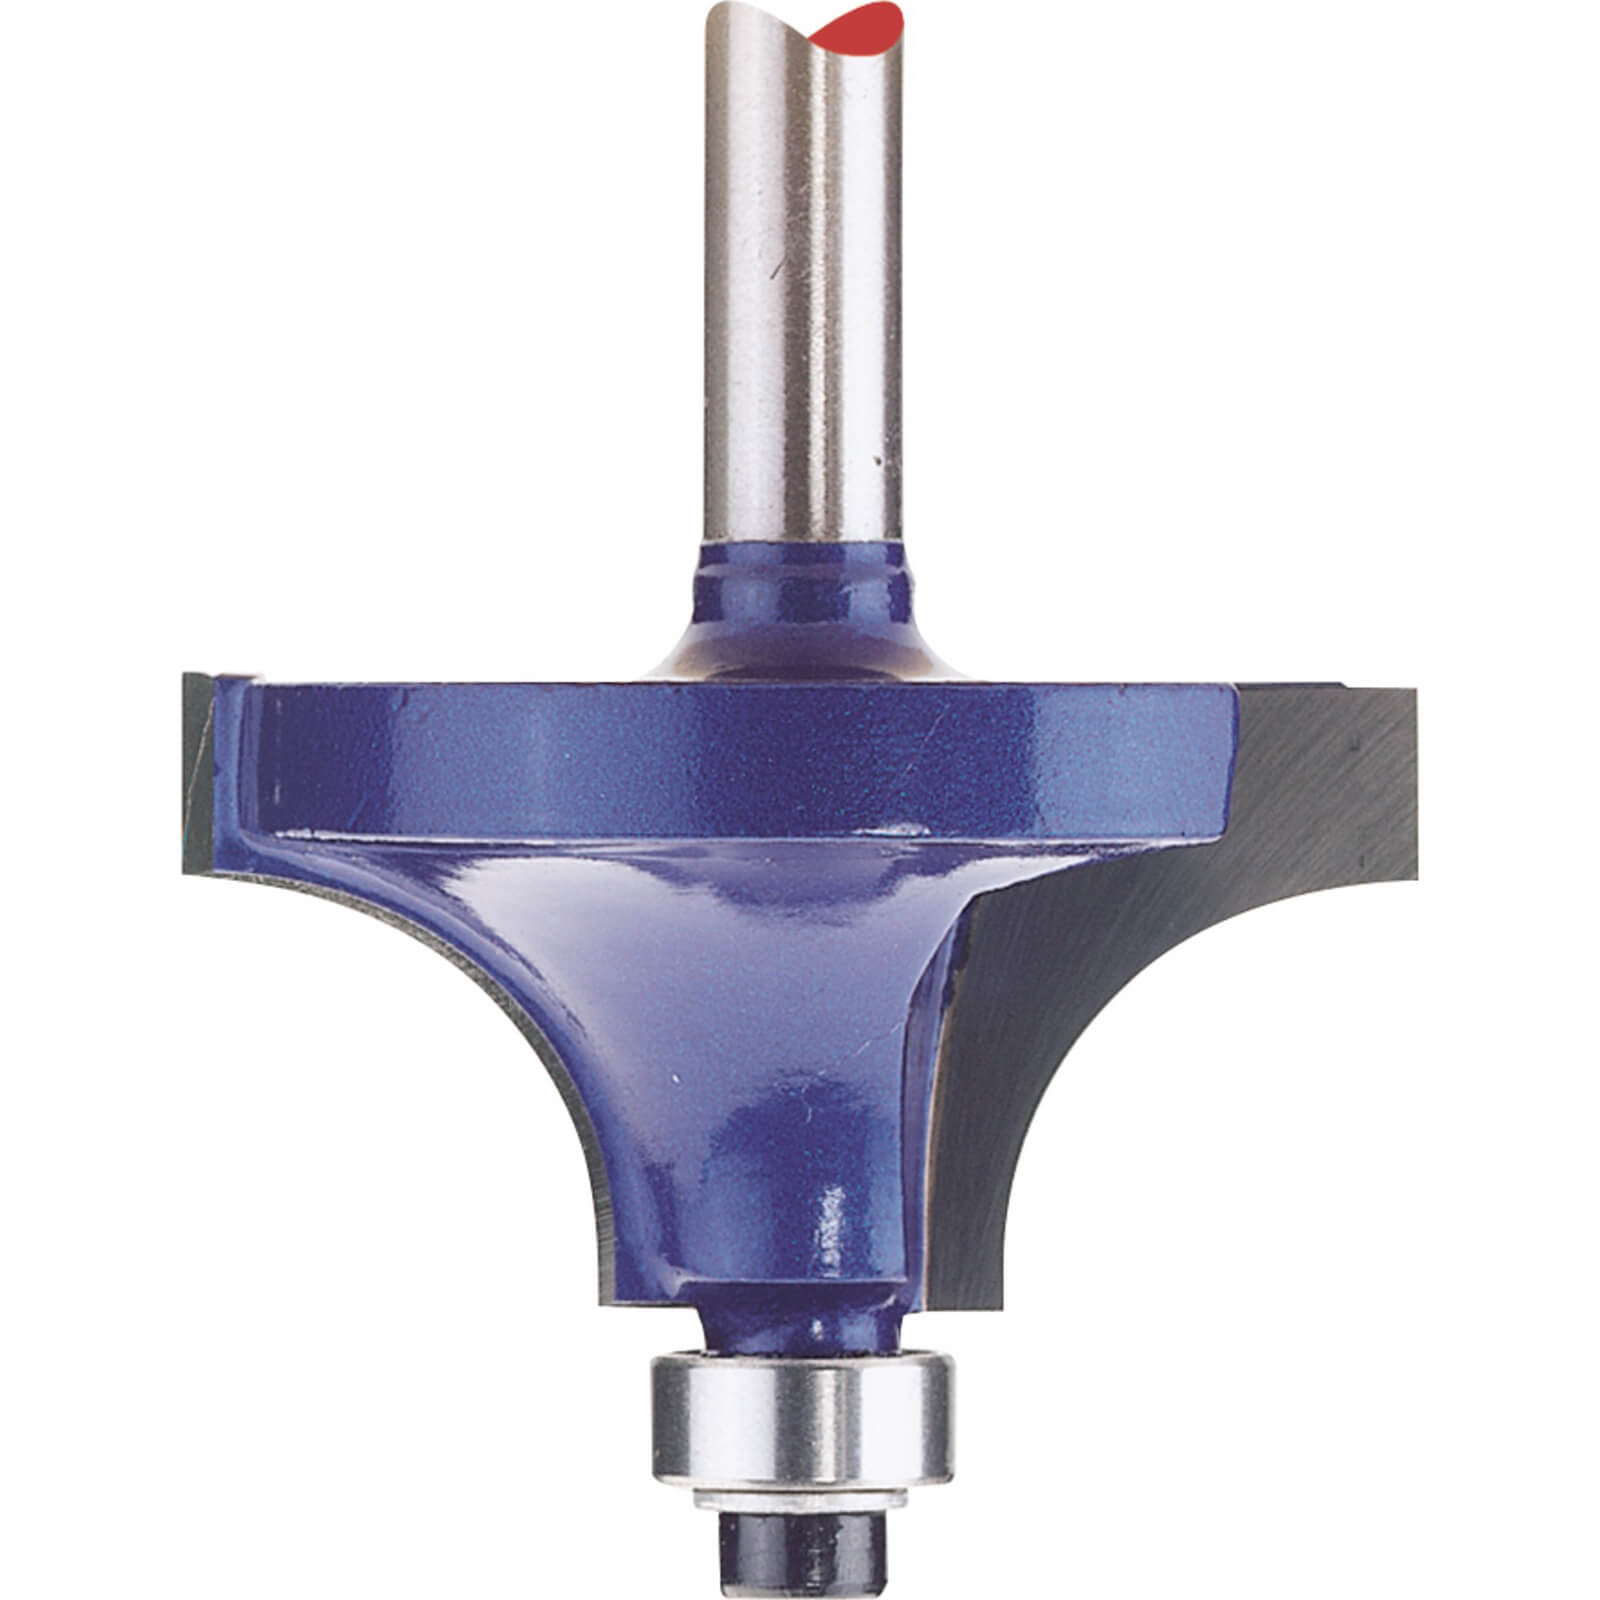 Image of Draper Bearing Guided Beading Router Cutter 38mm 20mm 1/4"